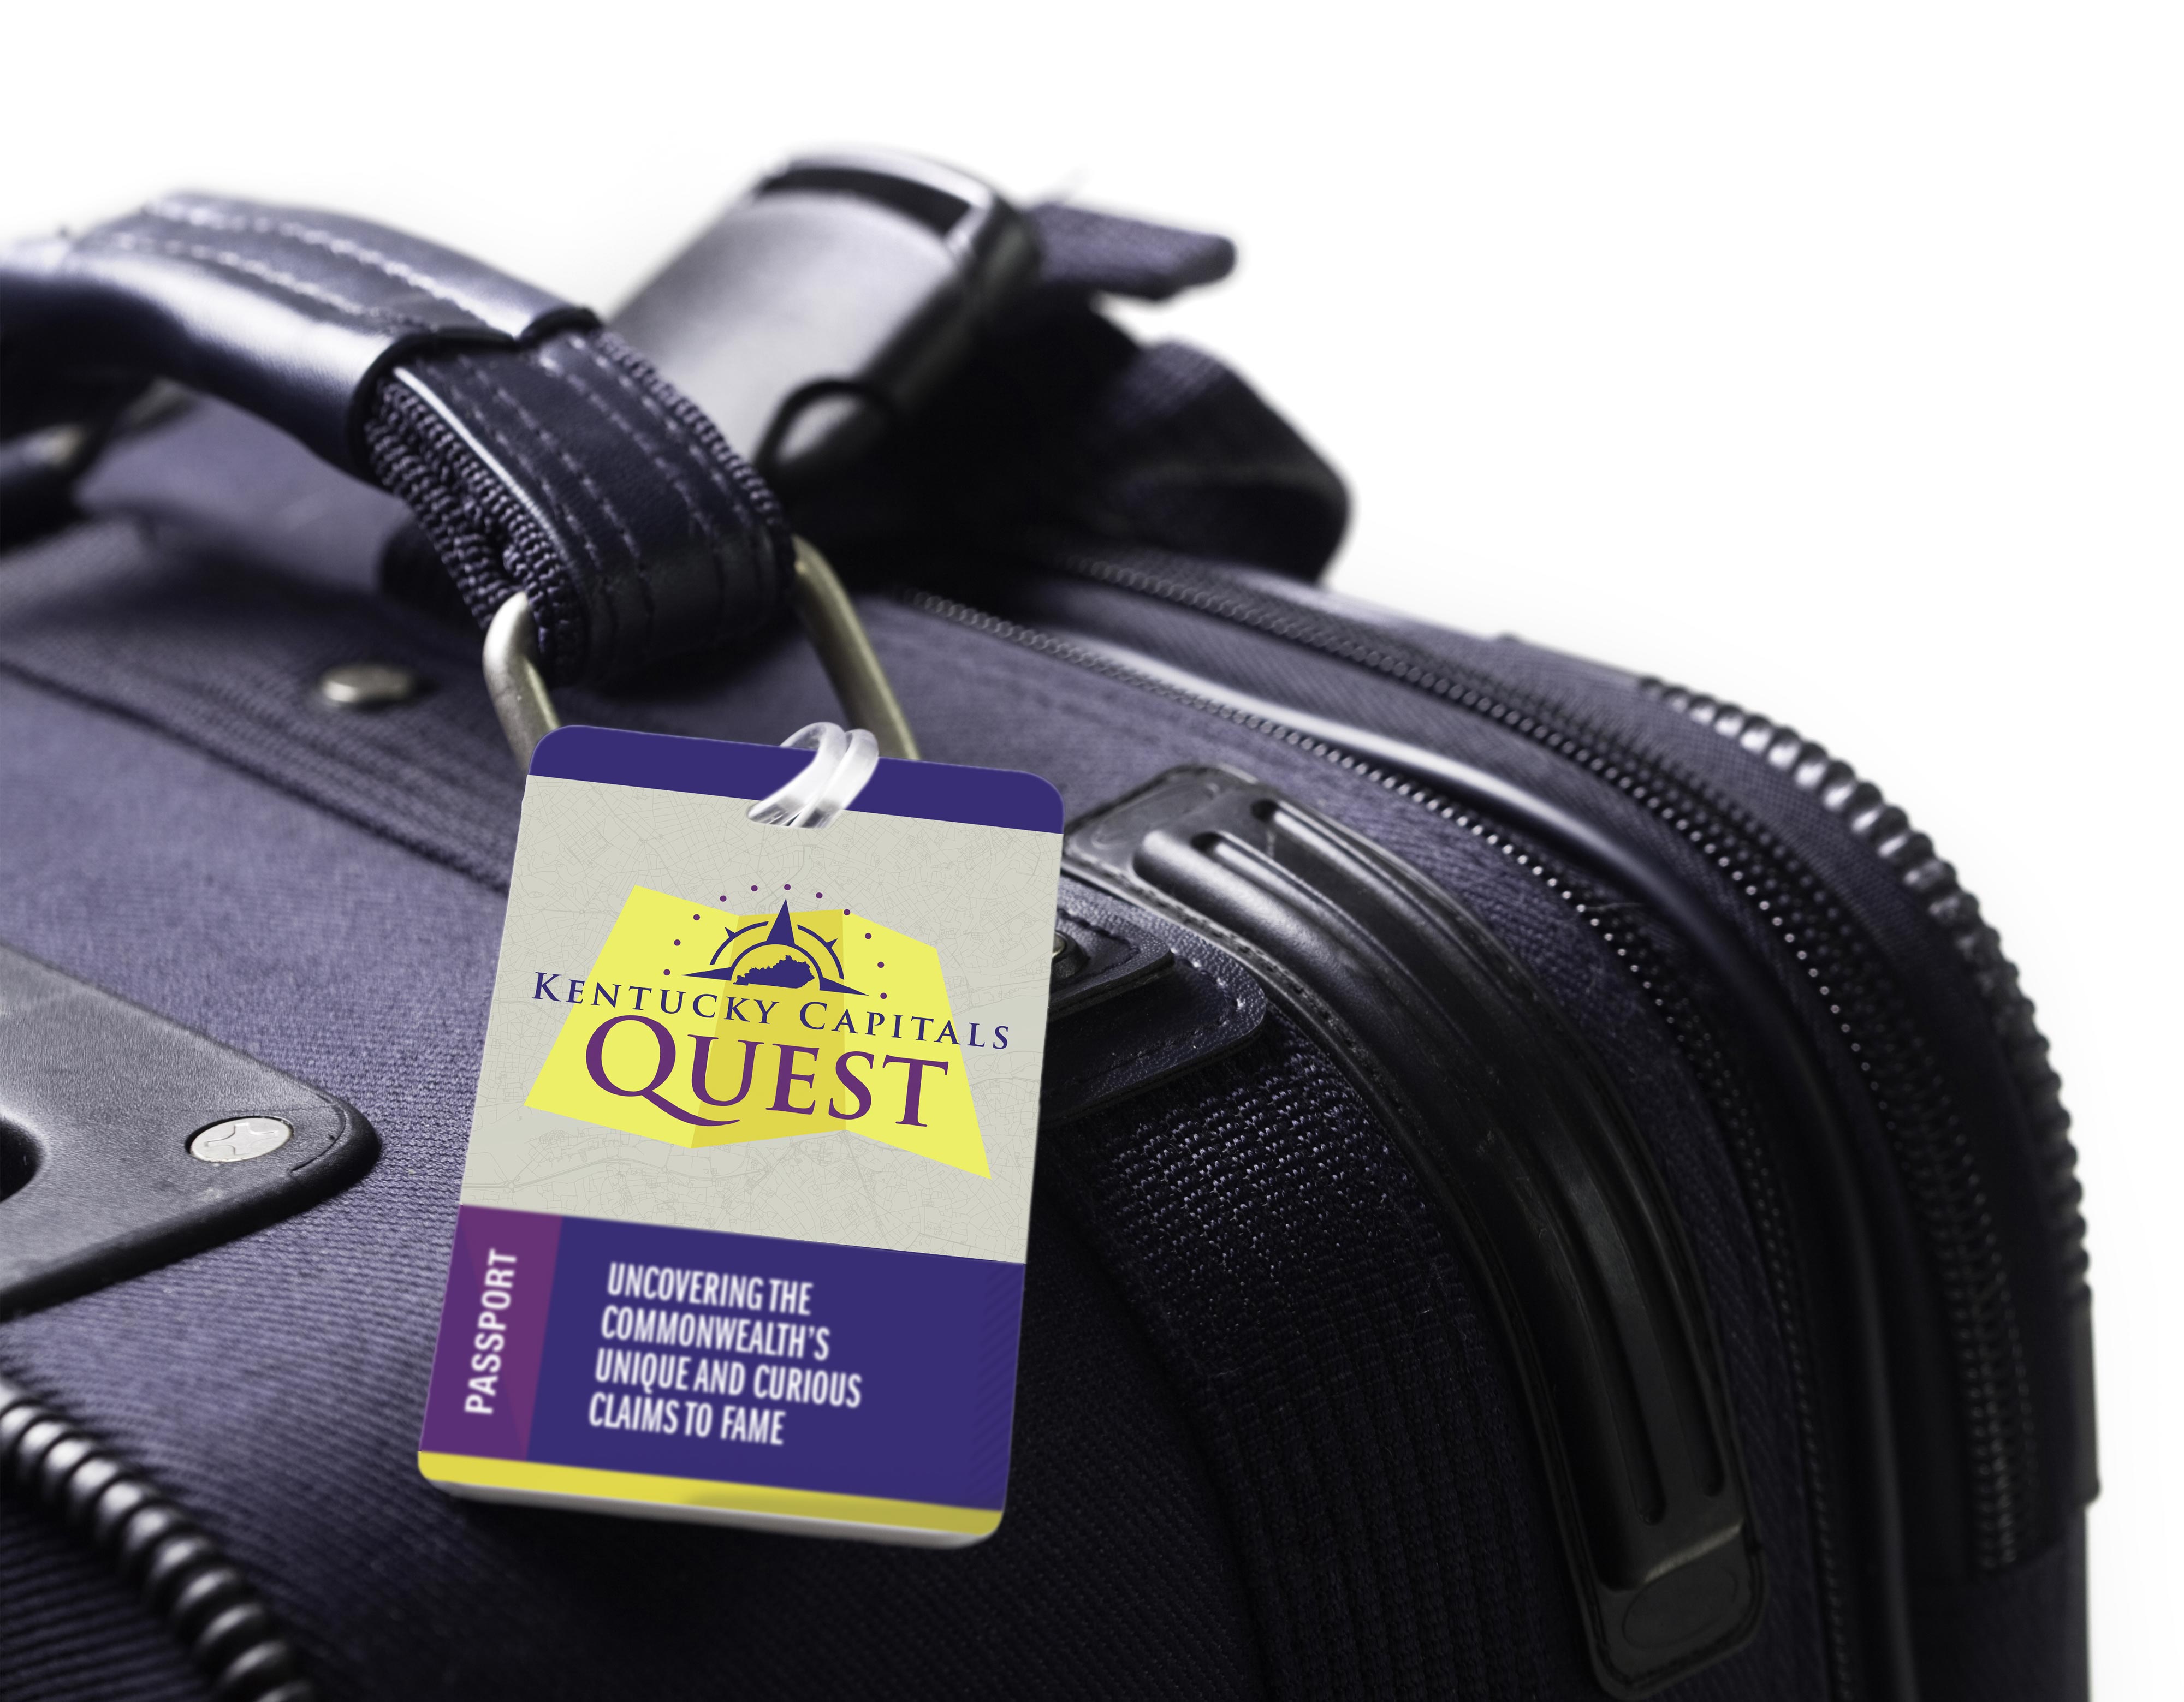 Kentucky Capitals Quest Luggage Tag